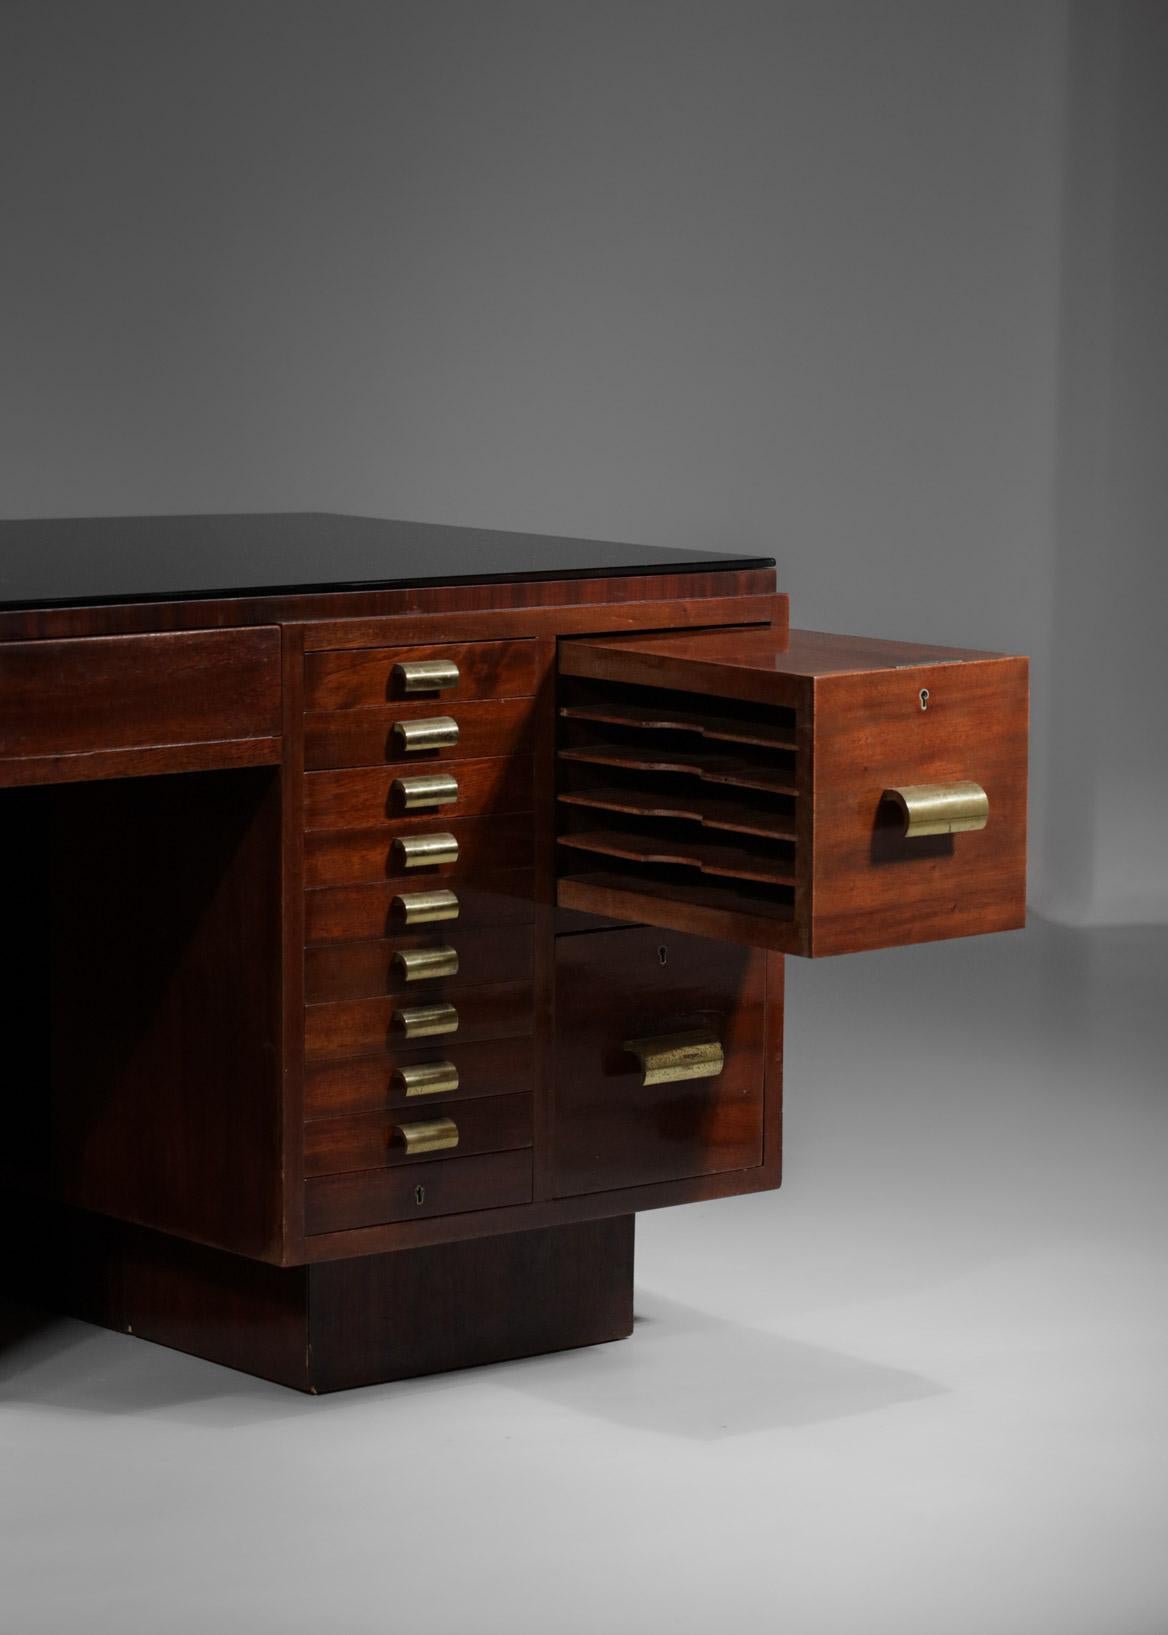 Imposing 1940's French Modernist Desk in Mahogany in Style of Dupré Lafon, E498 For Sale 5